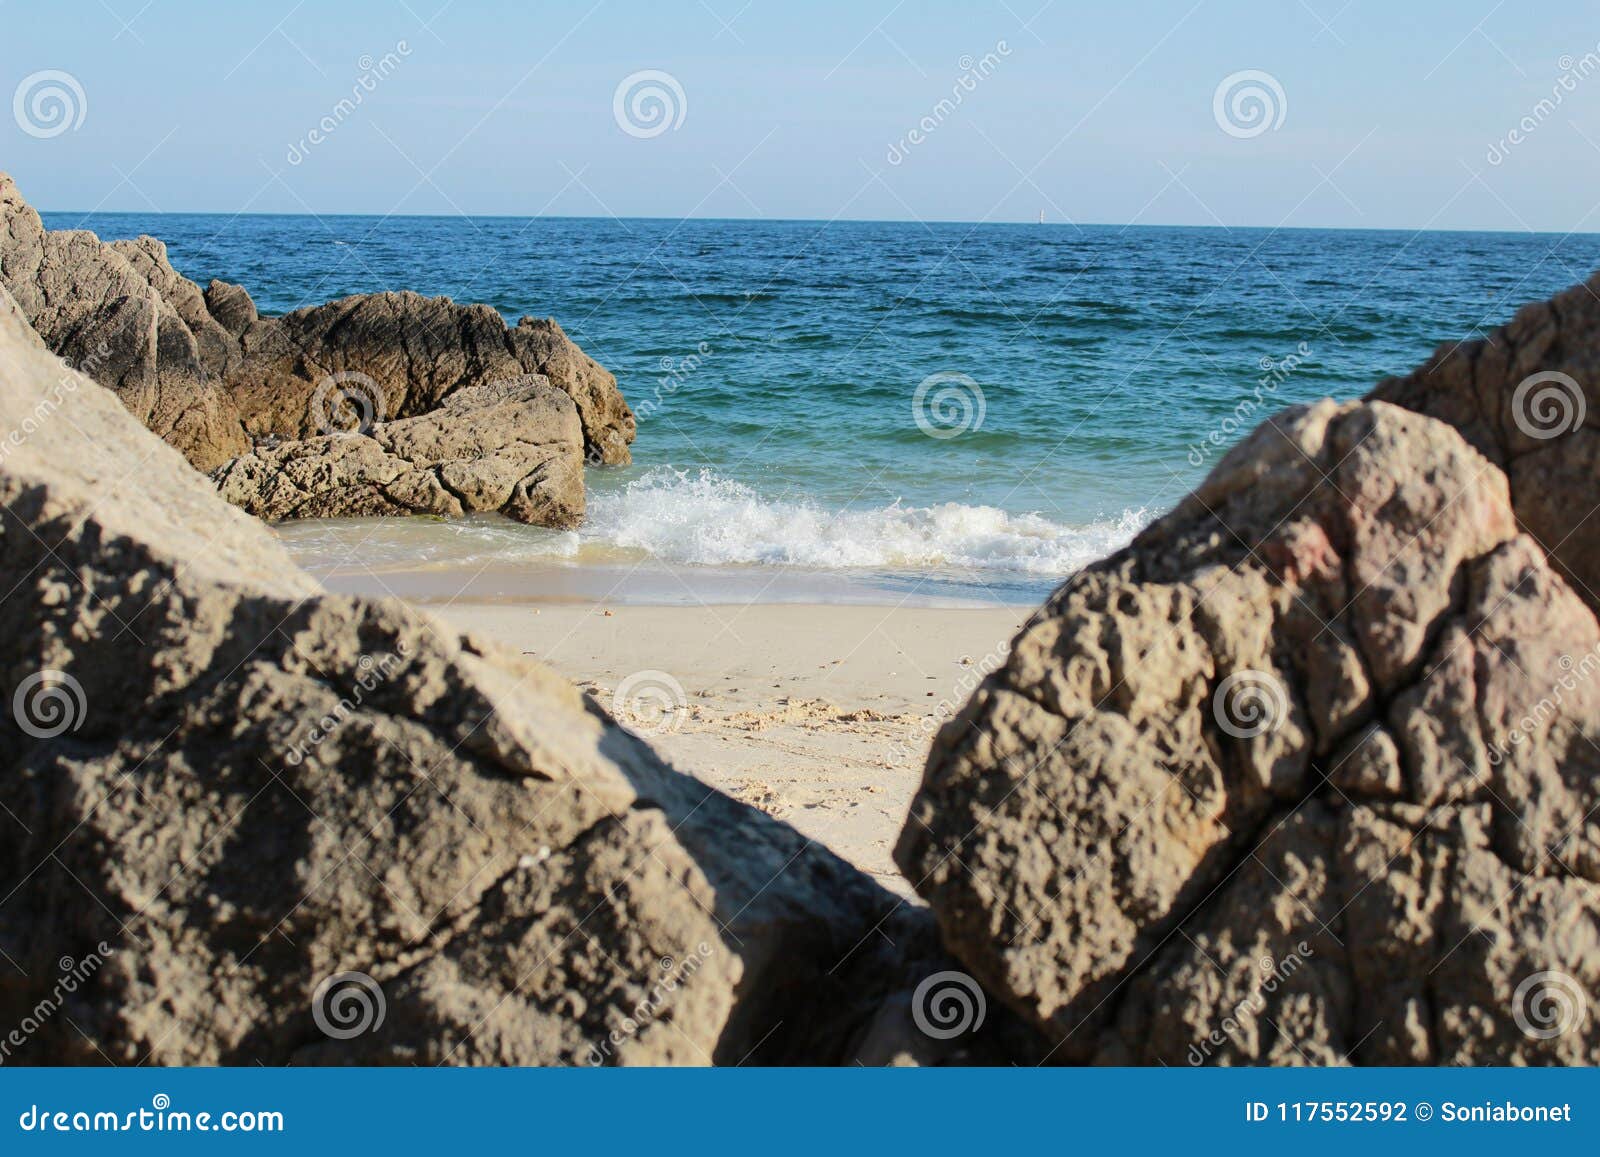 crystalline waters and rock textures of galapinhos beach